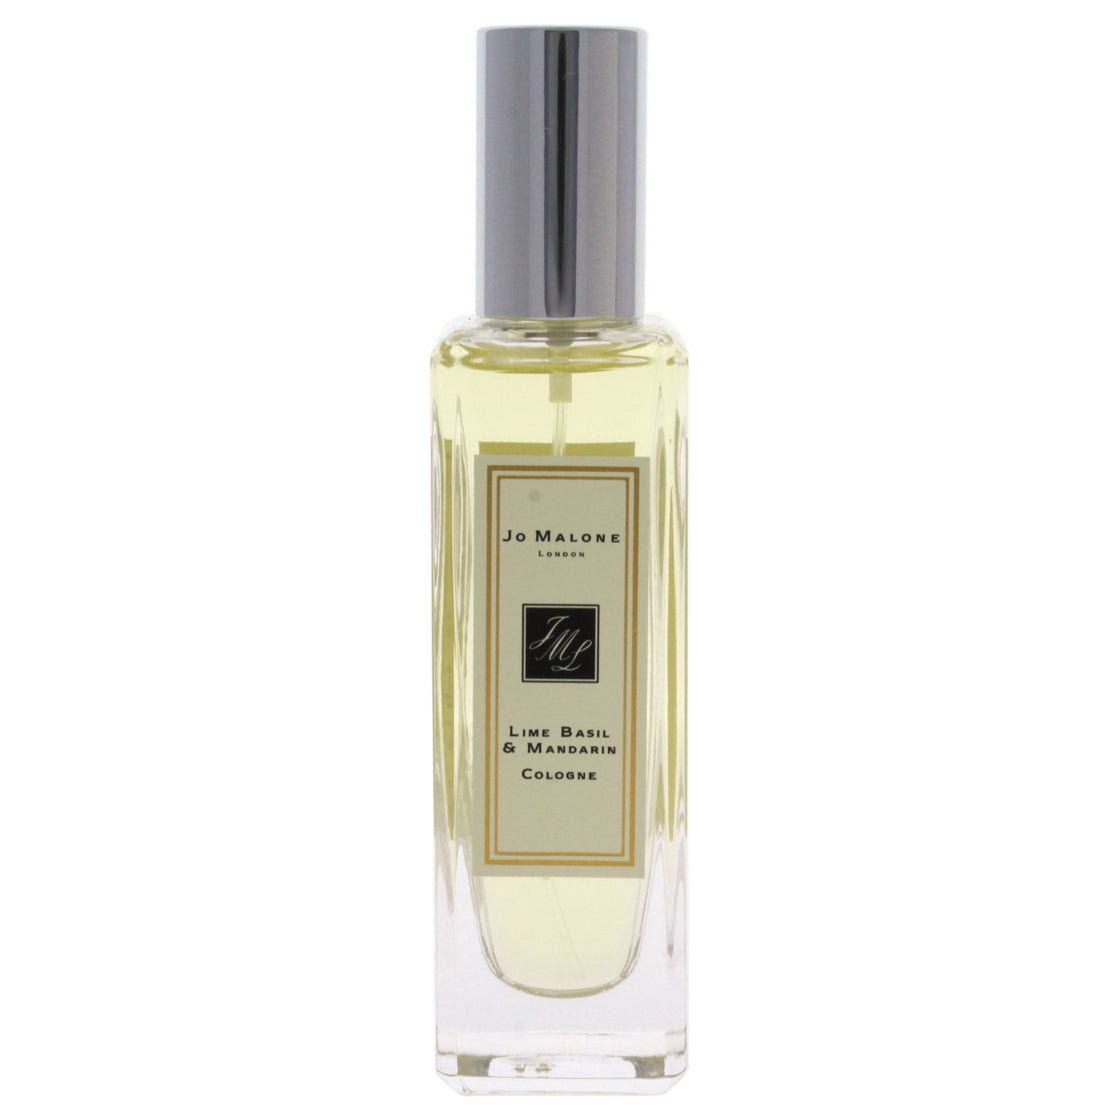 Lime Basil and Mandarin by Jo Malone for Women - 1 oz Cologne Spray